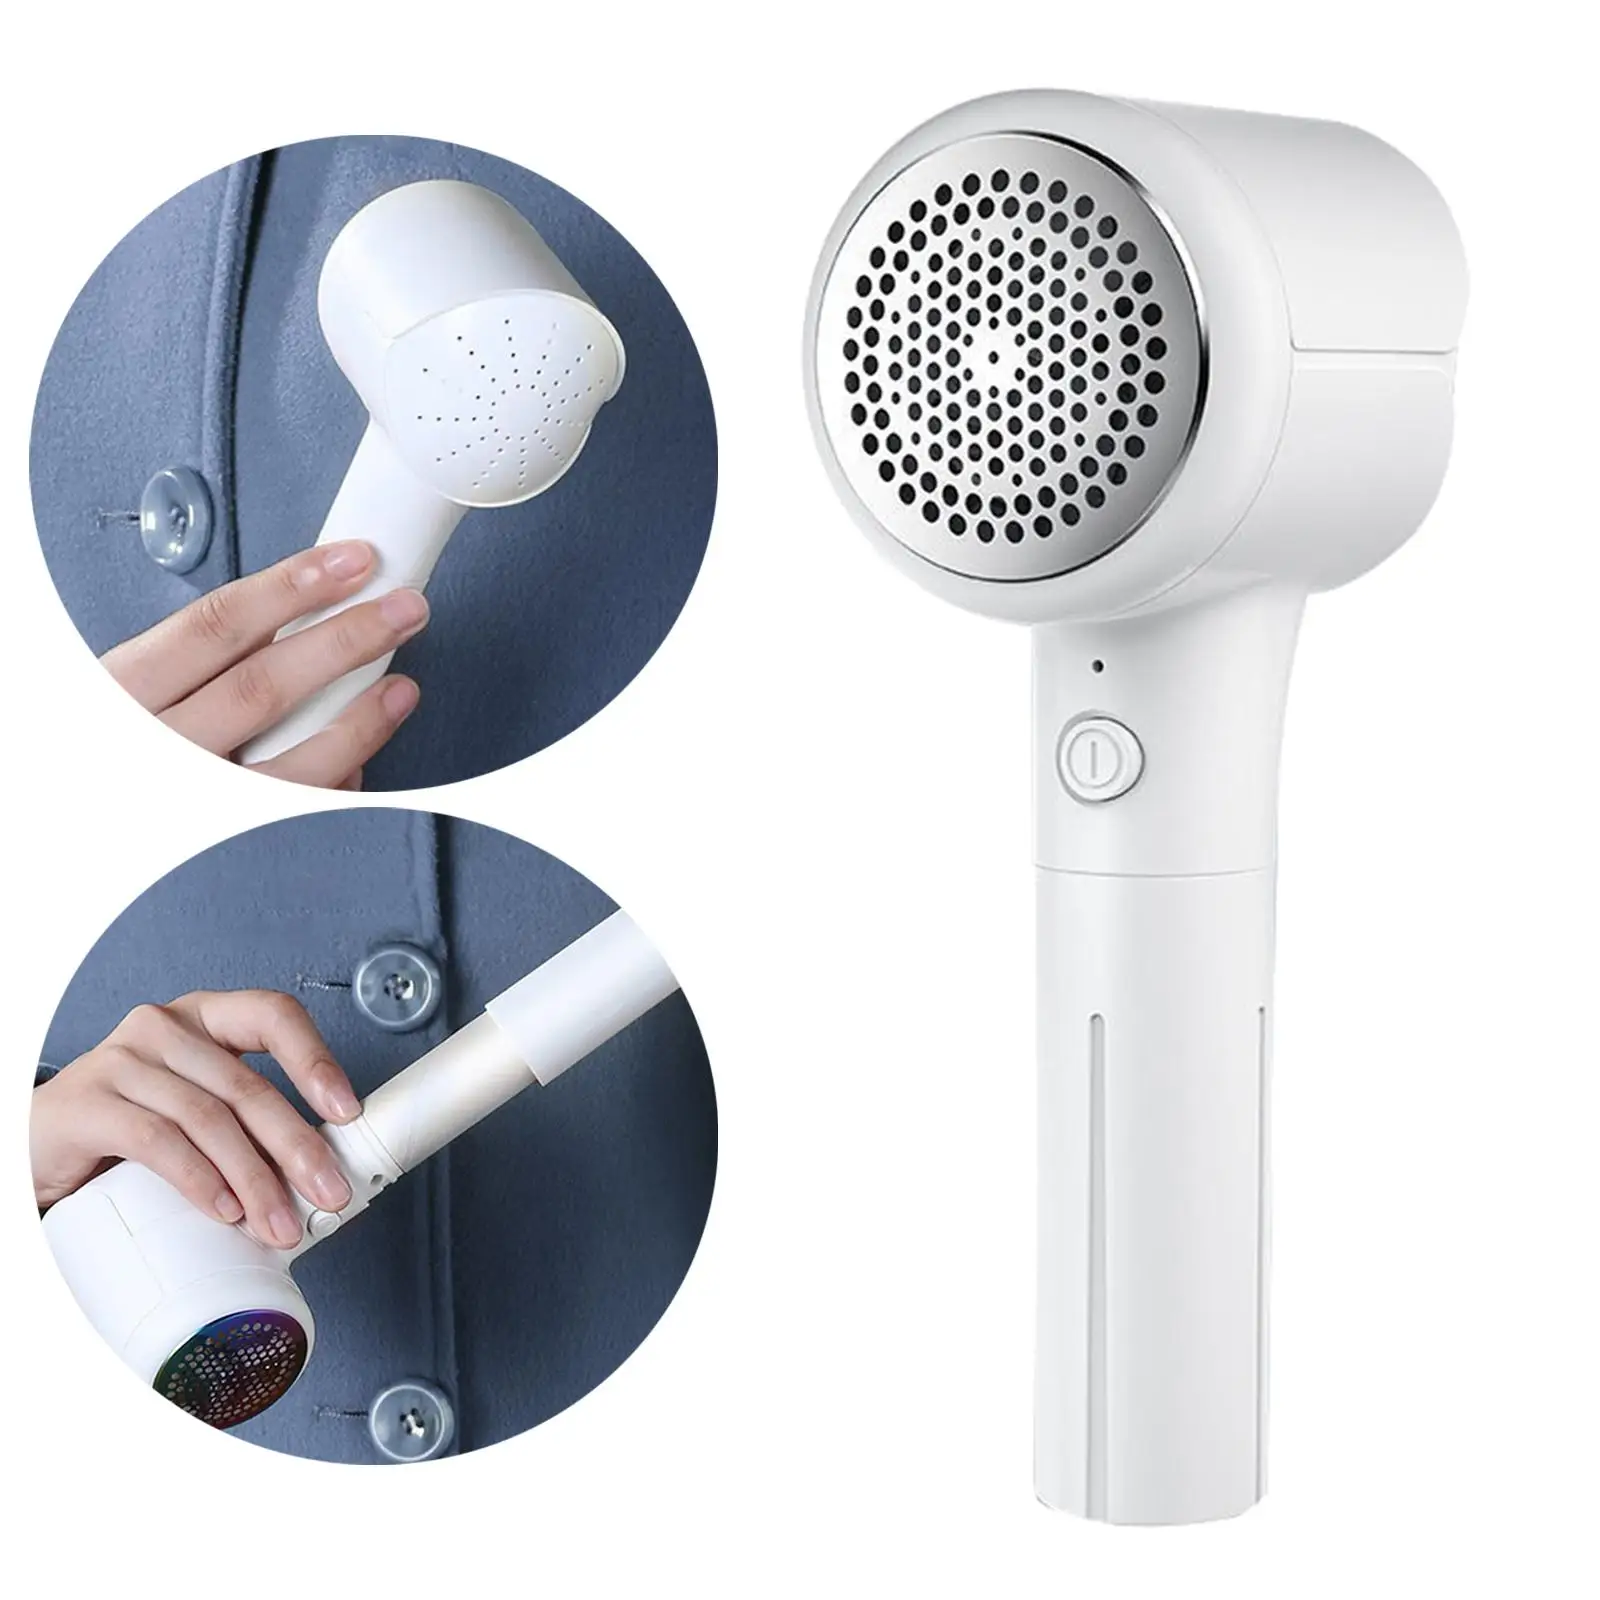 Portable Fabric Shaver 3-Leaf Blades Removal Lint Shaver for Synthetic Fibers Bedding